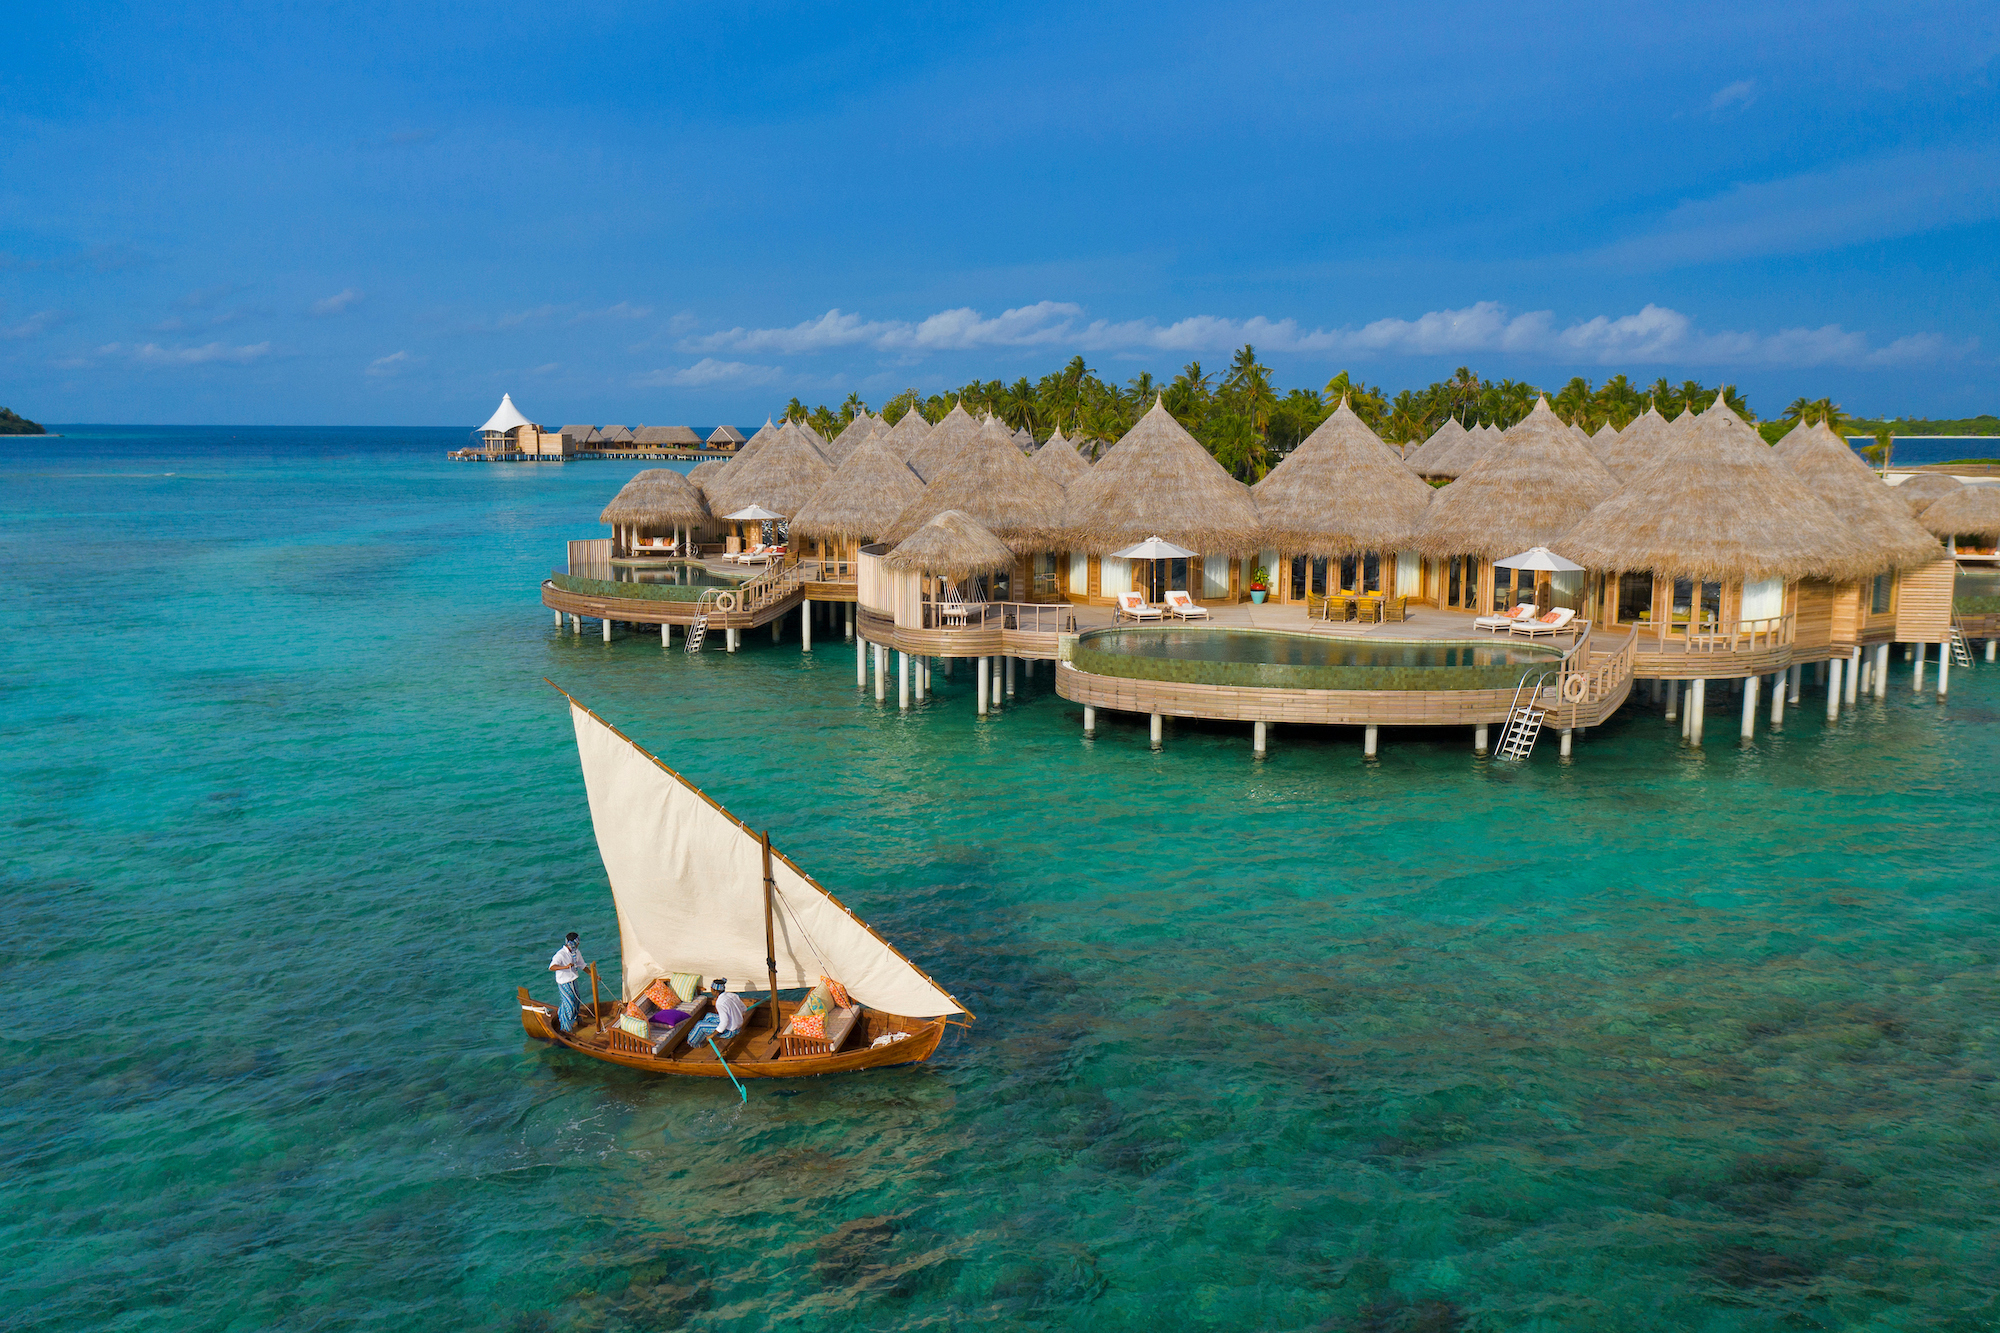 The Nautilus Maldives is a Perfect Getaway for the Entire Family